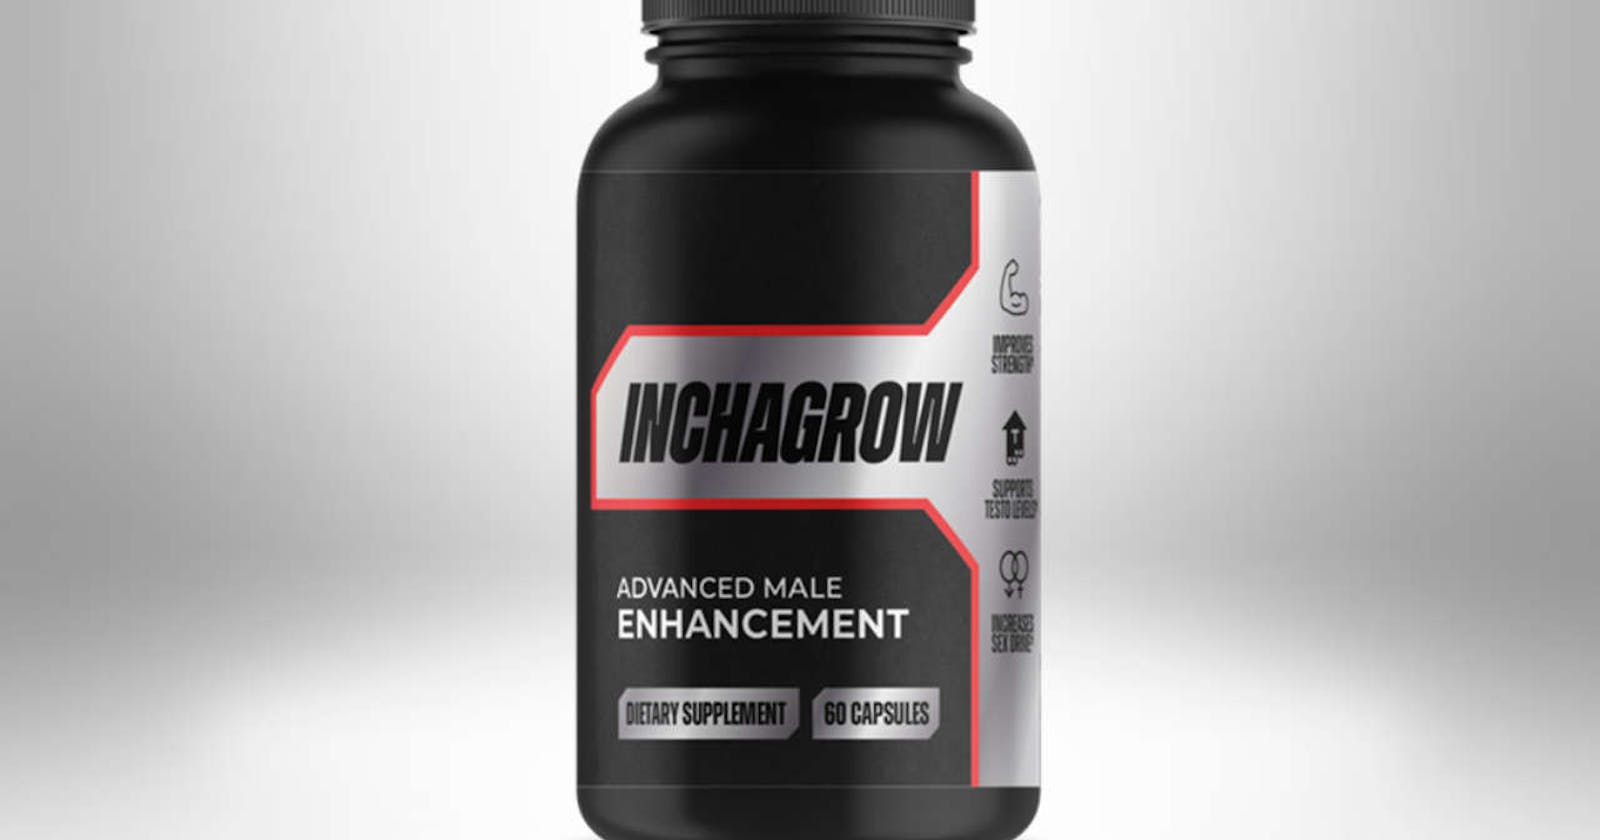 Inchagrow Male Enhancement Pills - Made From Natural Ingredients Improve Sexual Performance!